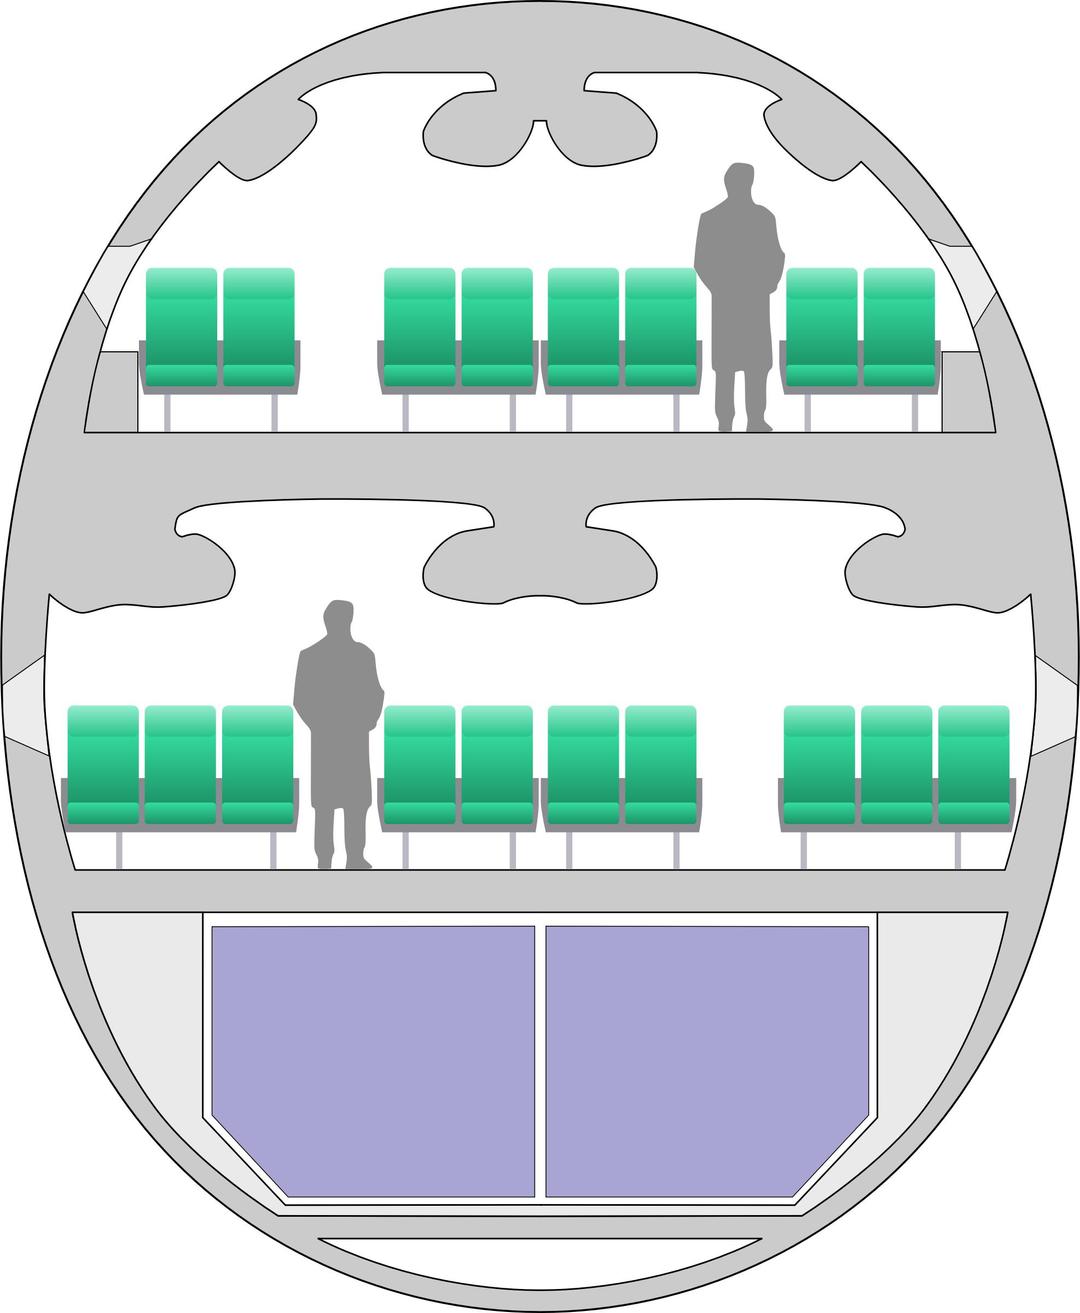 Airbus A380 Cross Section png transparent